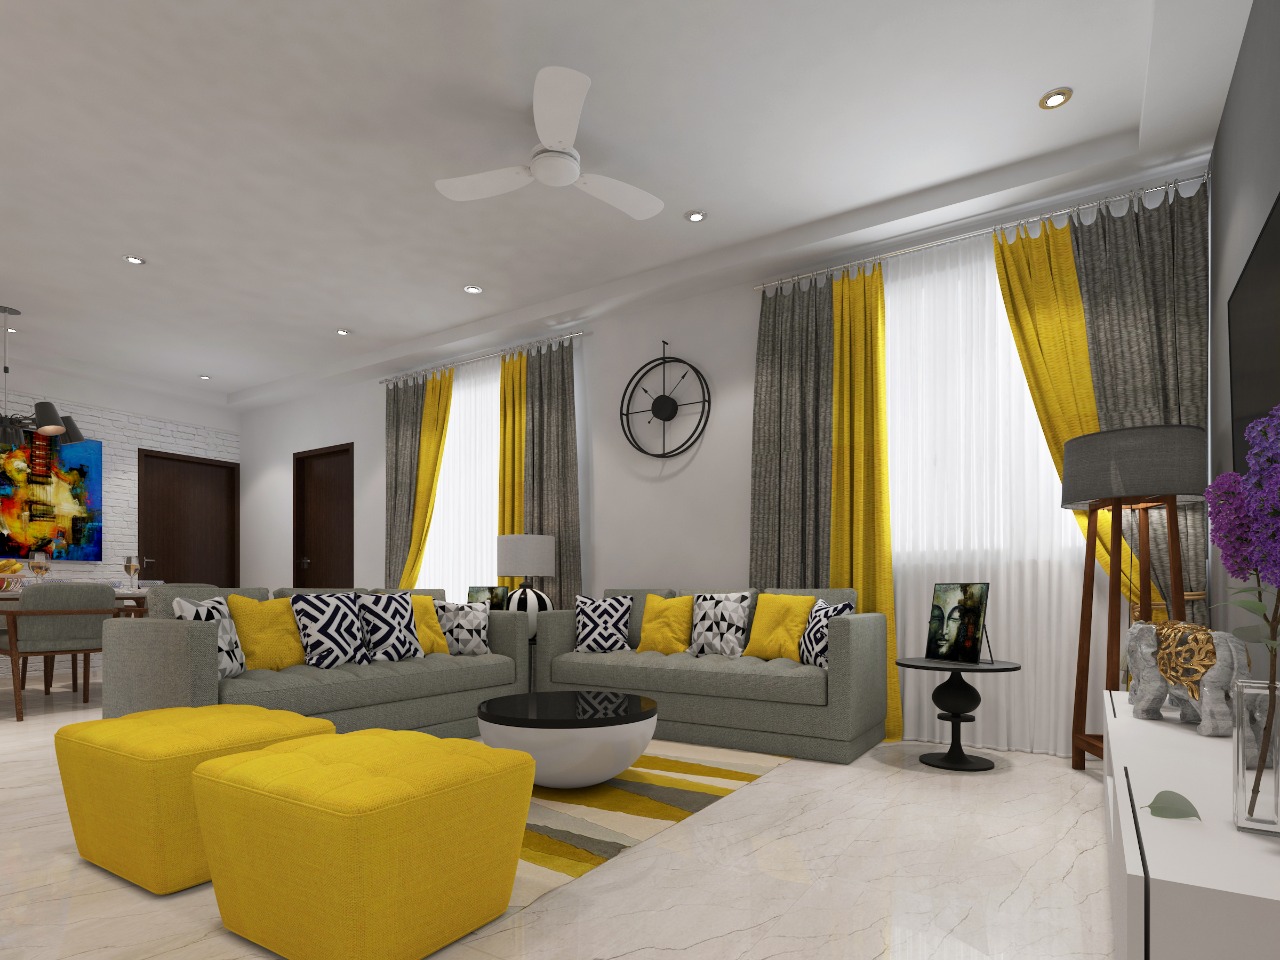 How Colonelz Interior Designing Can Help In Transforming The Interior Ambience Of Your Home